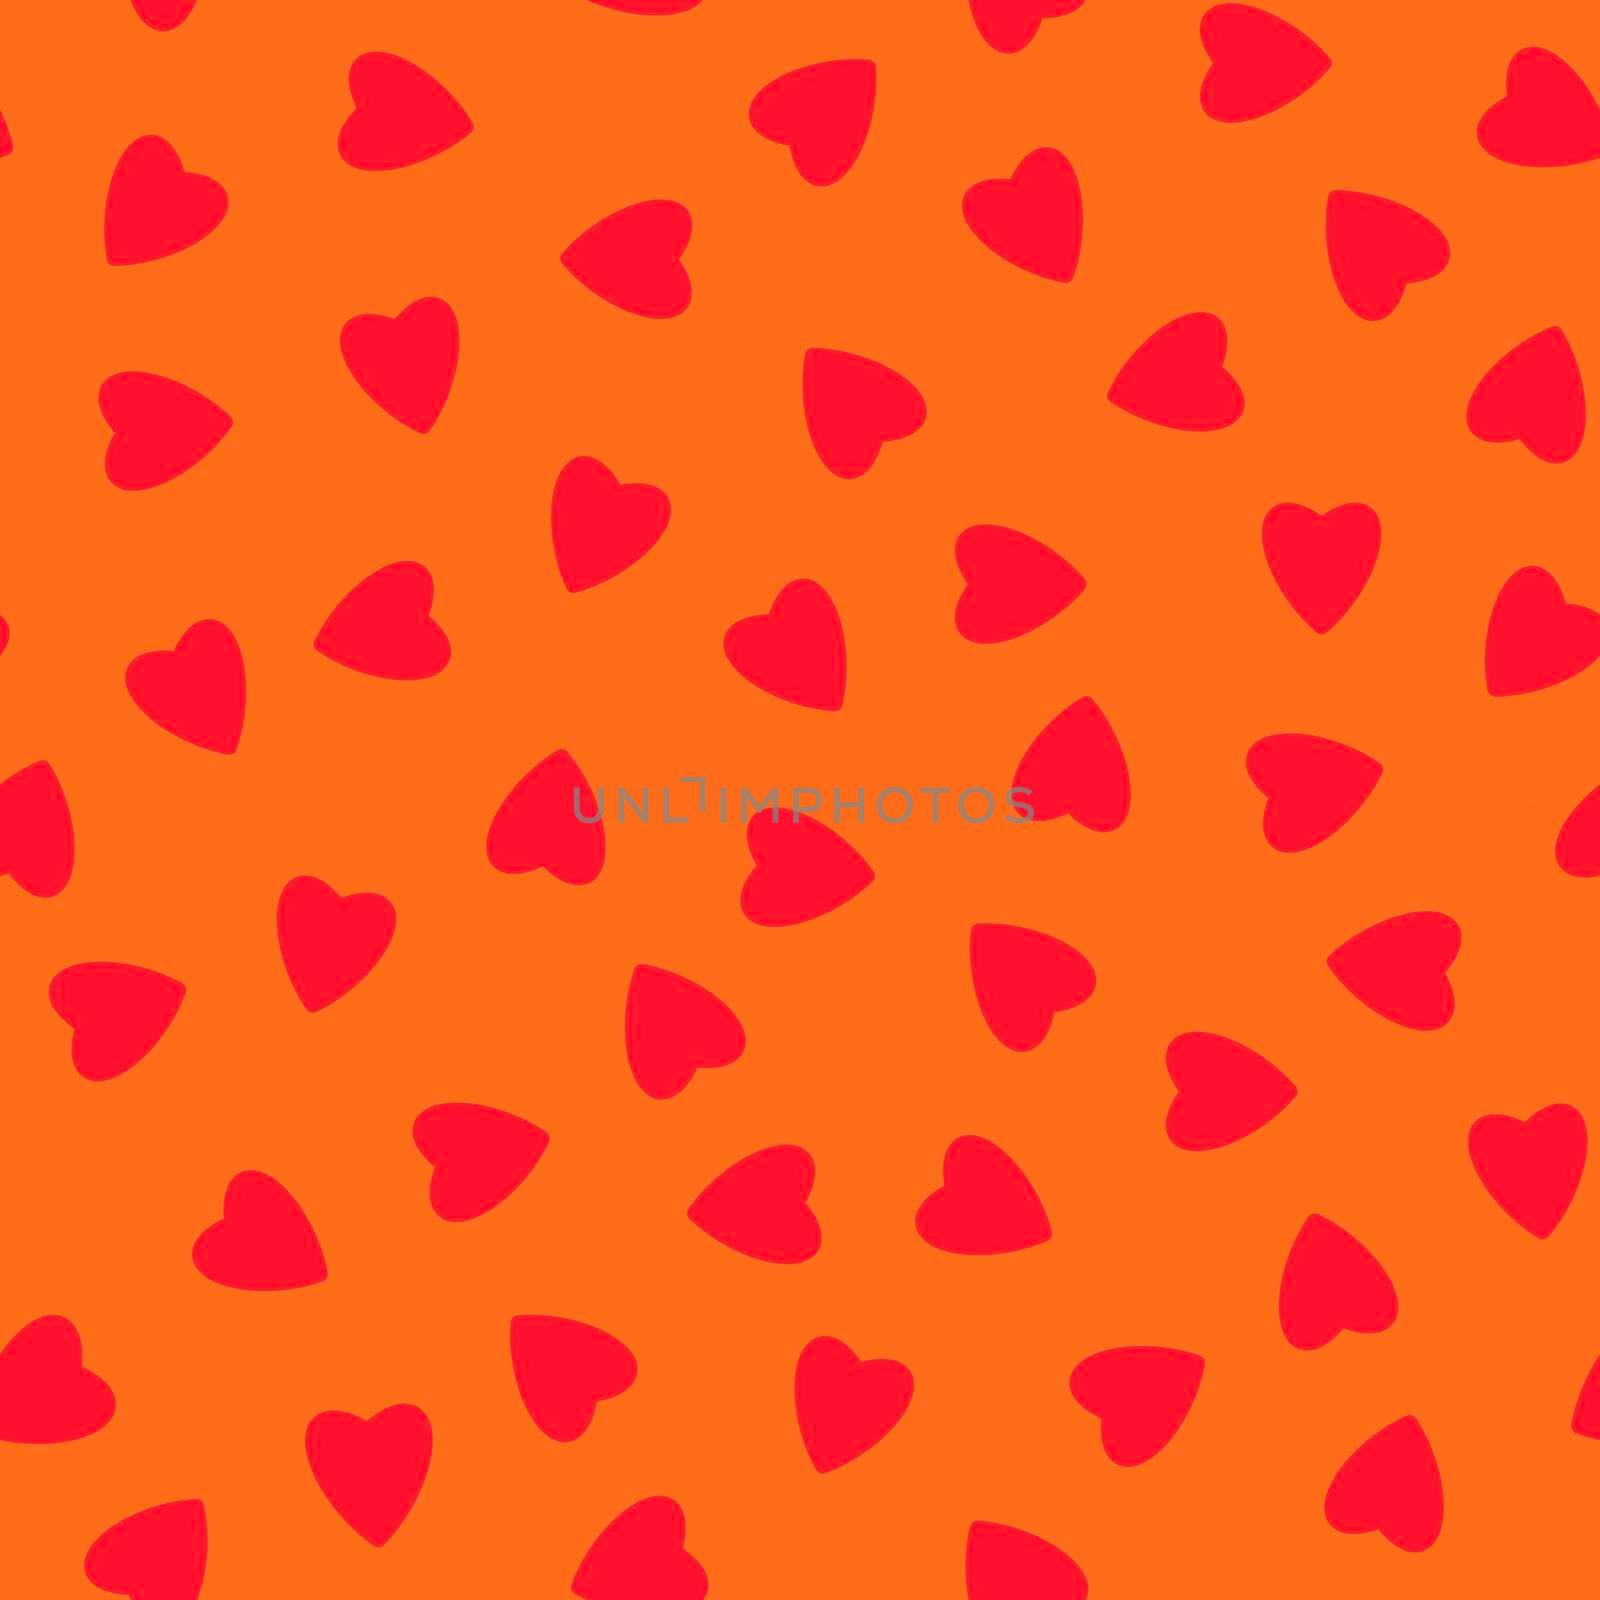 Simple hearts seamless pattern,endless chaotic texture made of tiny heart silhouettes.Valentines,mothers day background.Great for Easter,wedding,scrapbook,gift wrapping paper,textiles.Red on orange by Angelsmoon